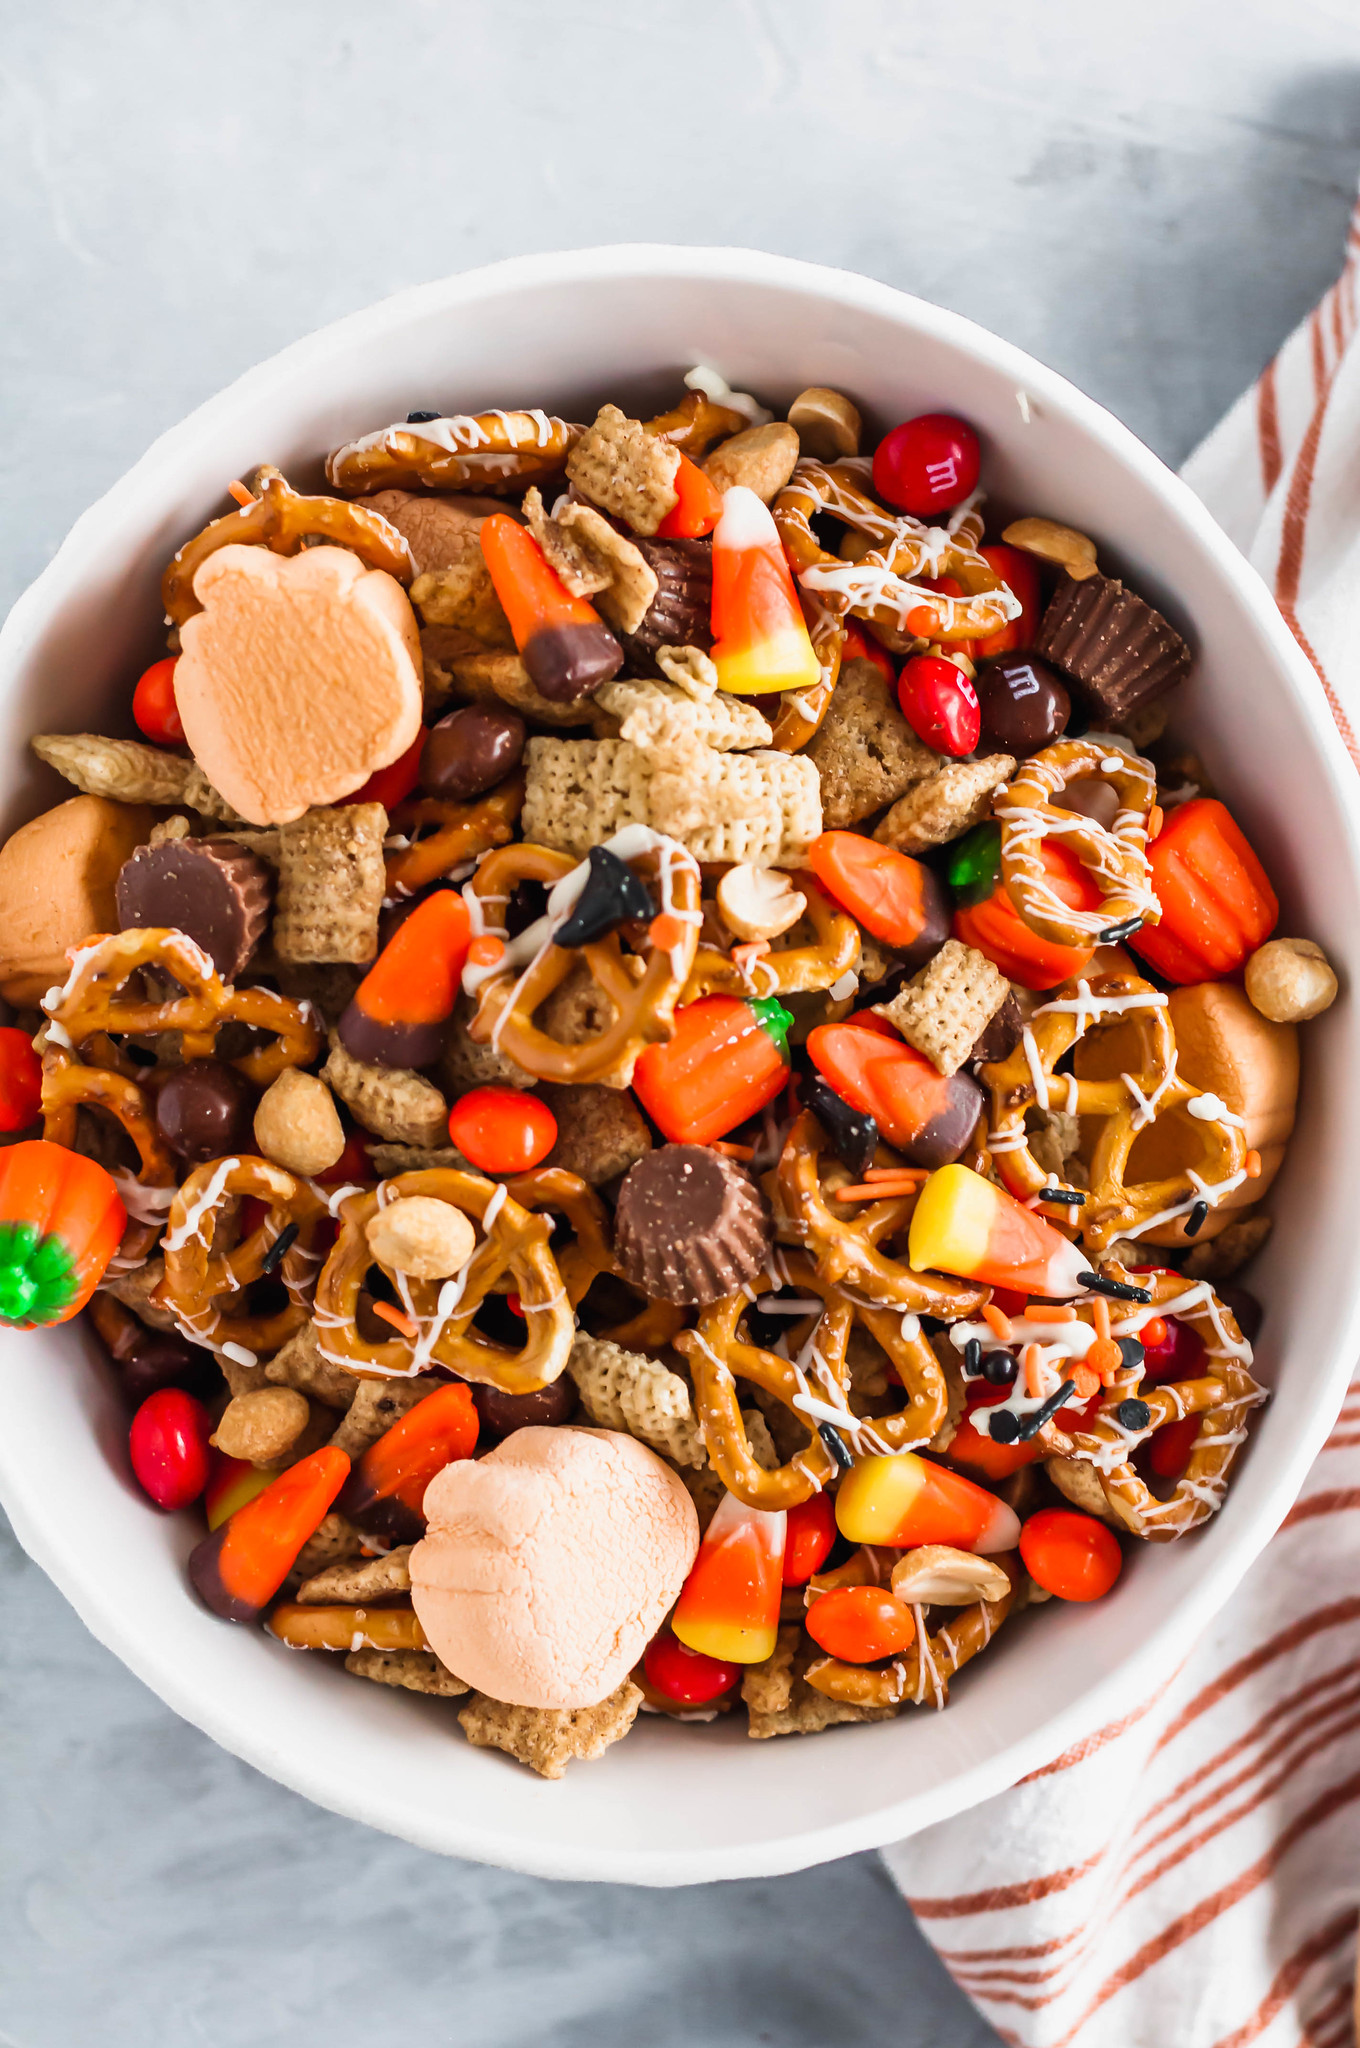 Need a fun snack for October? This Halloween Snack Mix is the perfect combination of sweet and salty ingredients and will be a huge hit with your family.